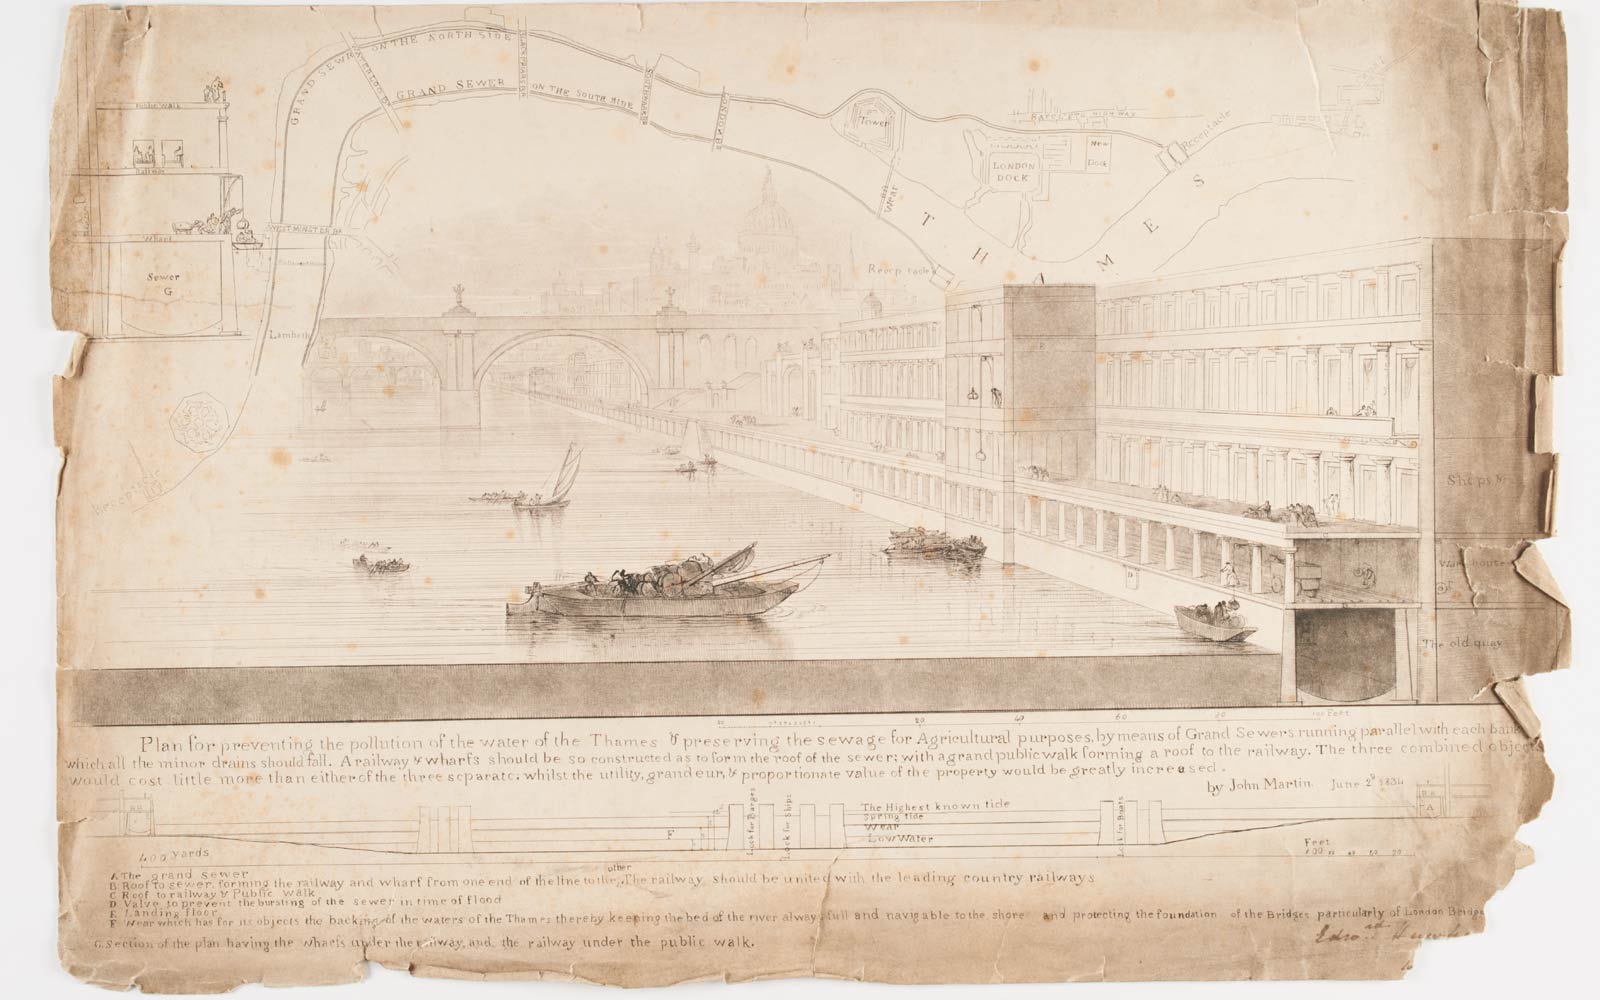 Plans by the artist John Martin for a solution to London's drainage issue.